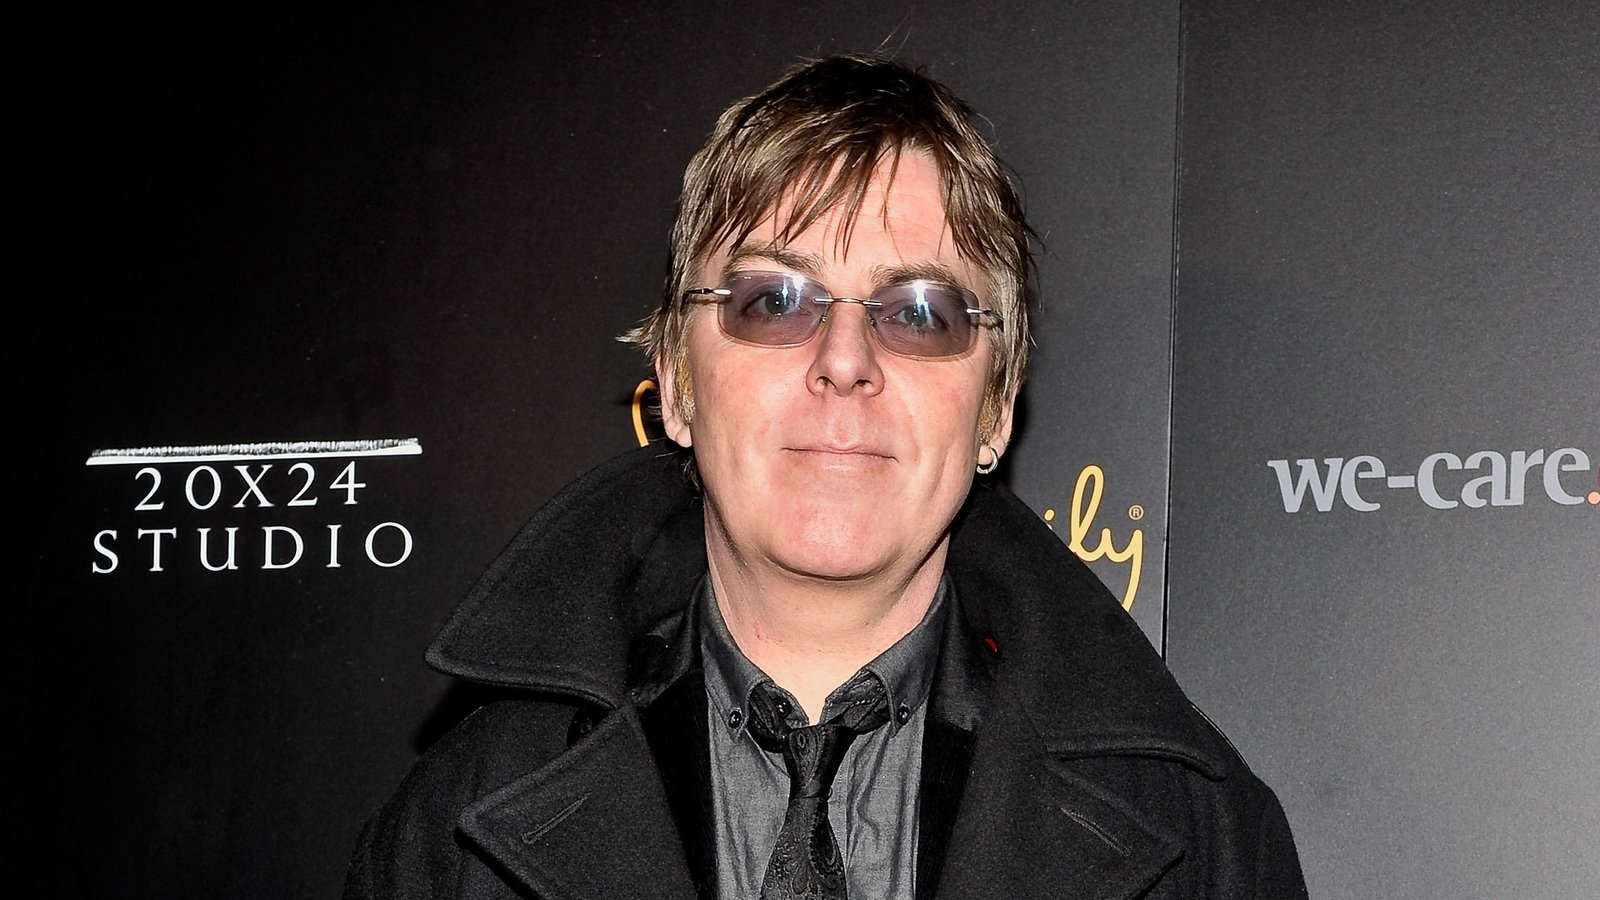 Andy Rourke, The Smiths bassist, dies aged 59